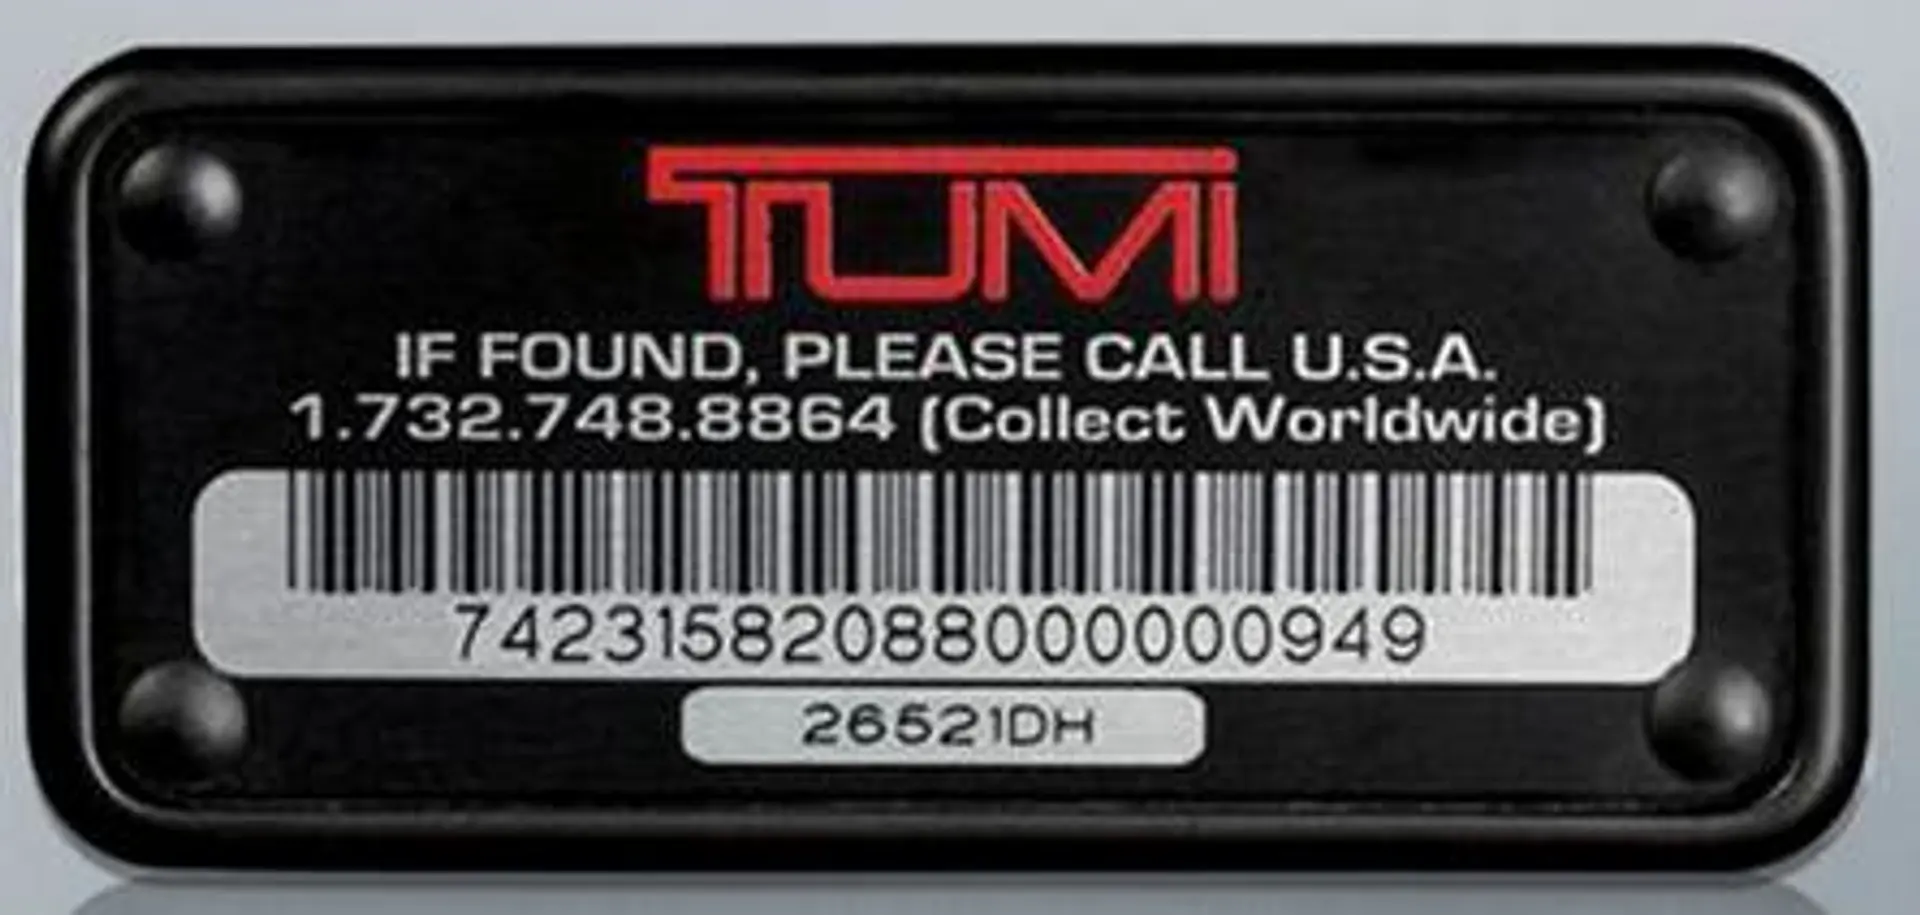 Lifestyle Articles - Smart tracking solution from TUMI